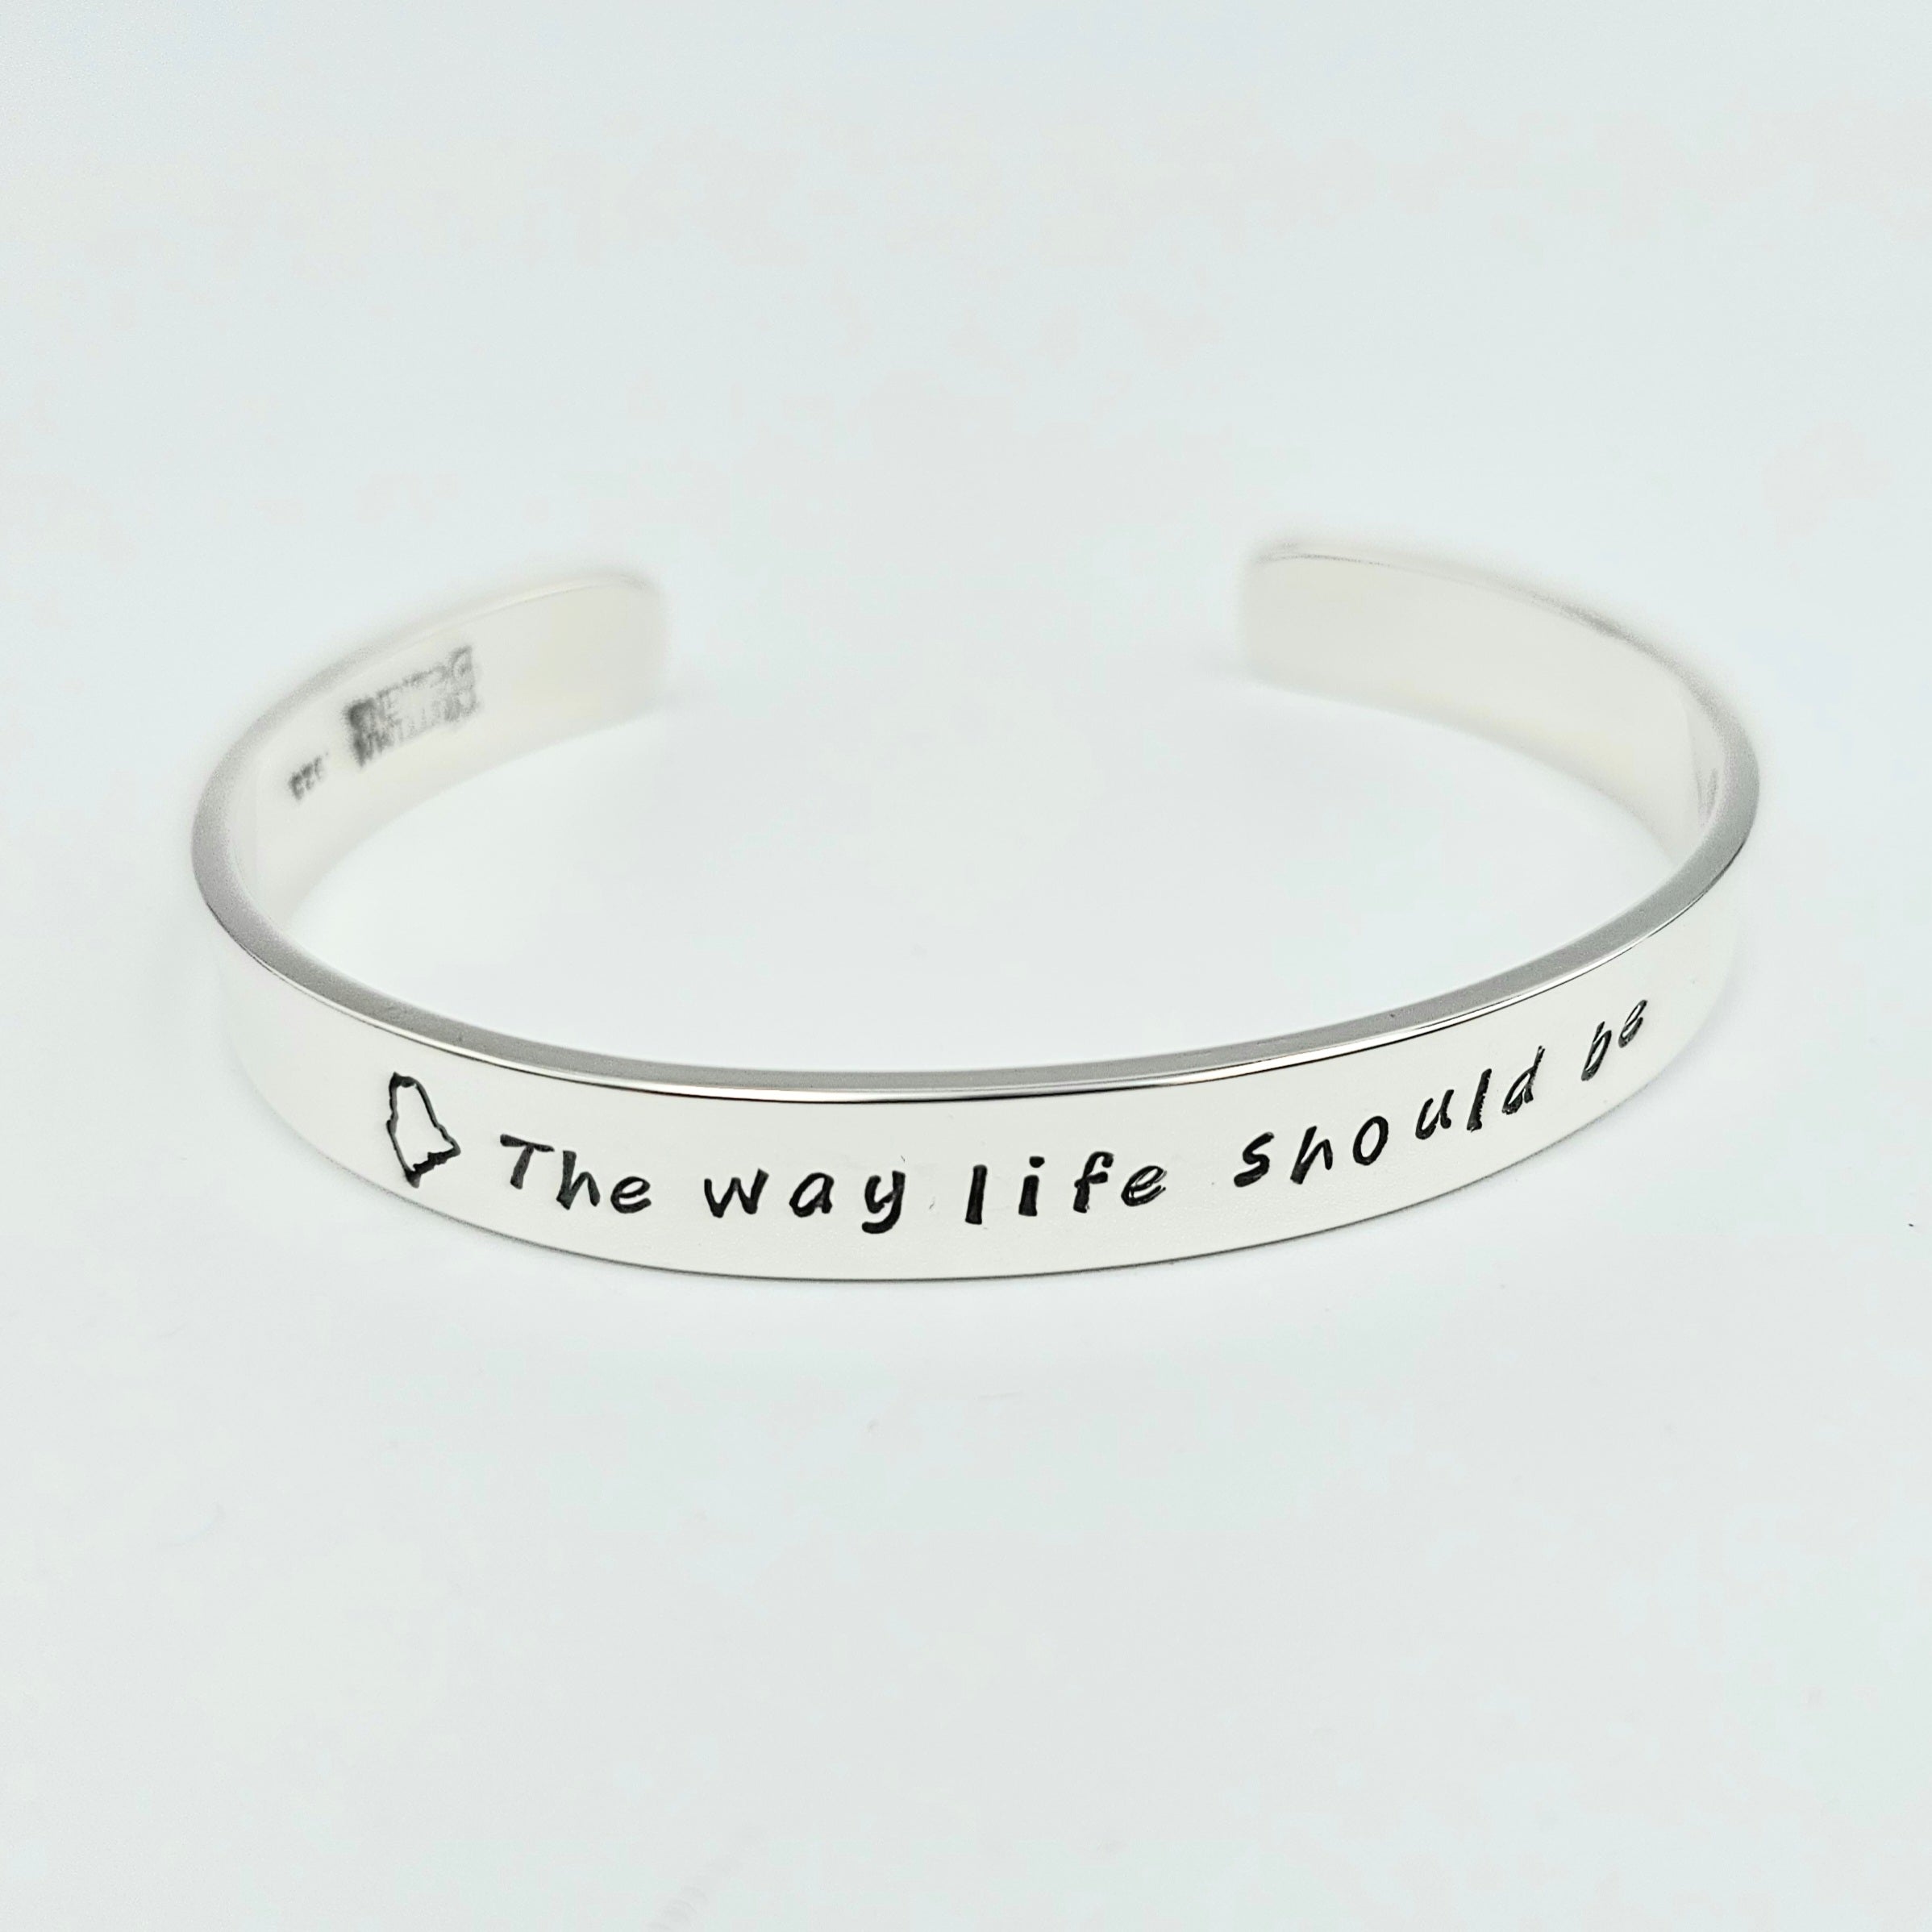 Maine, the way life should be sterling silver cuff bracelet